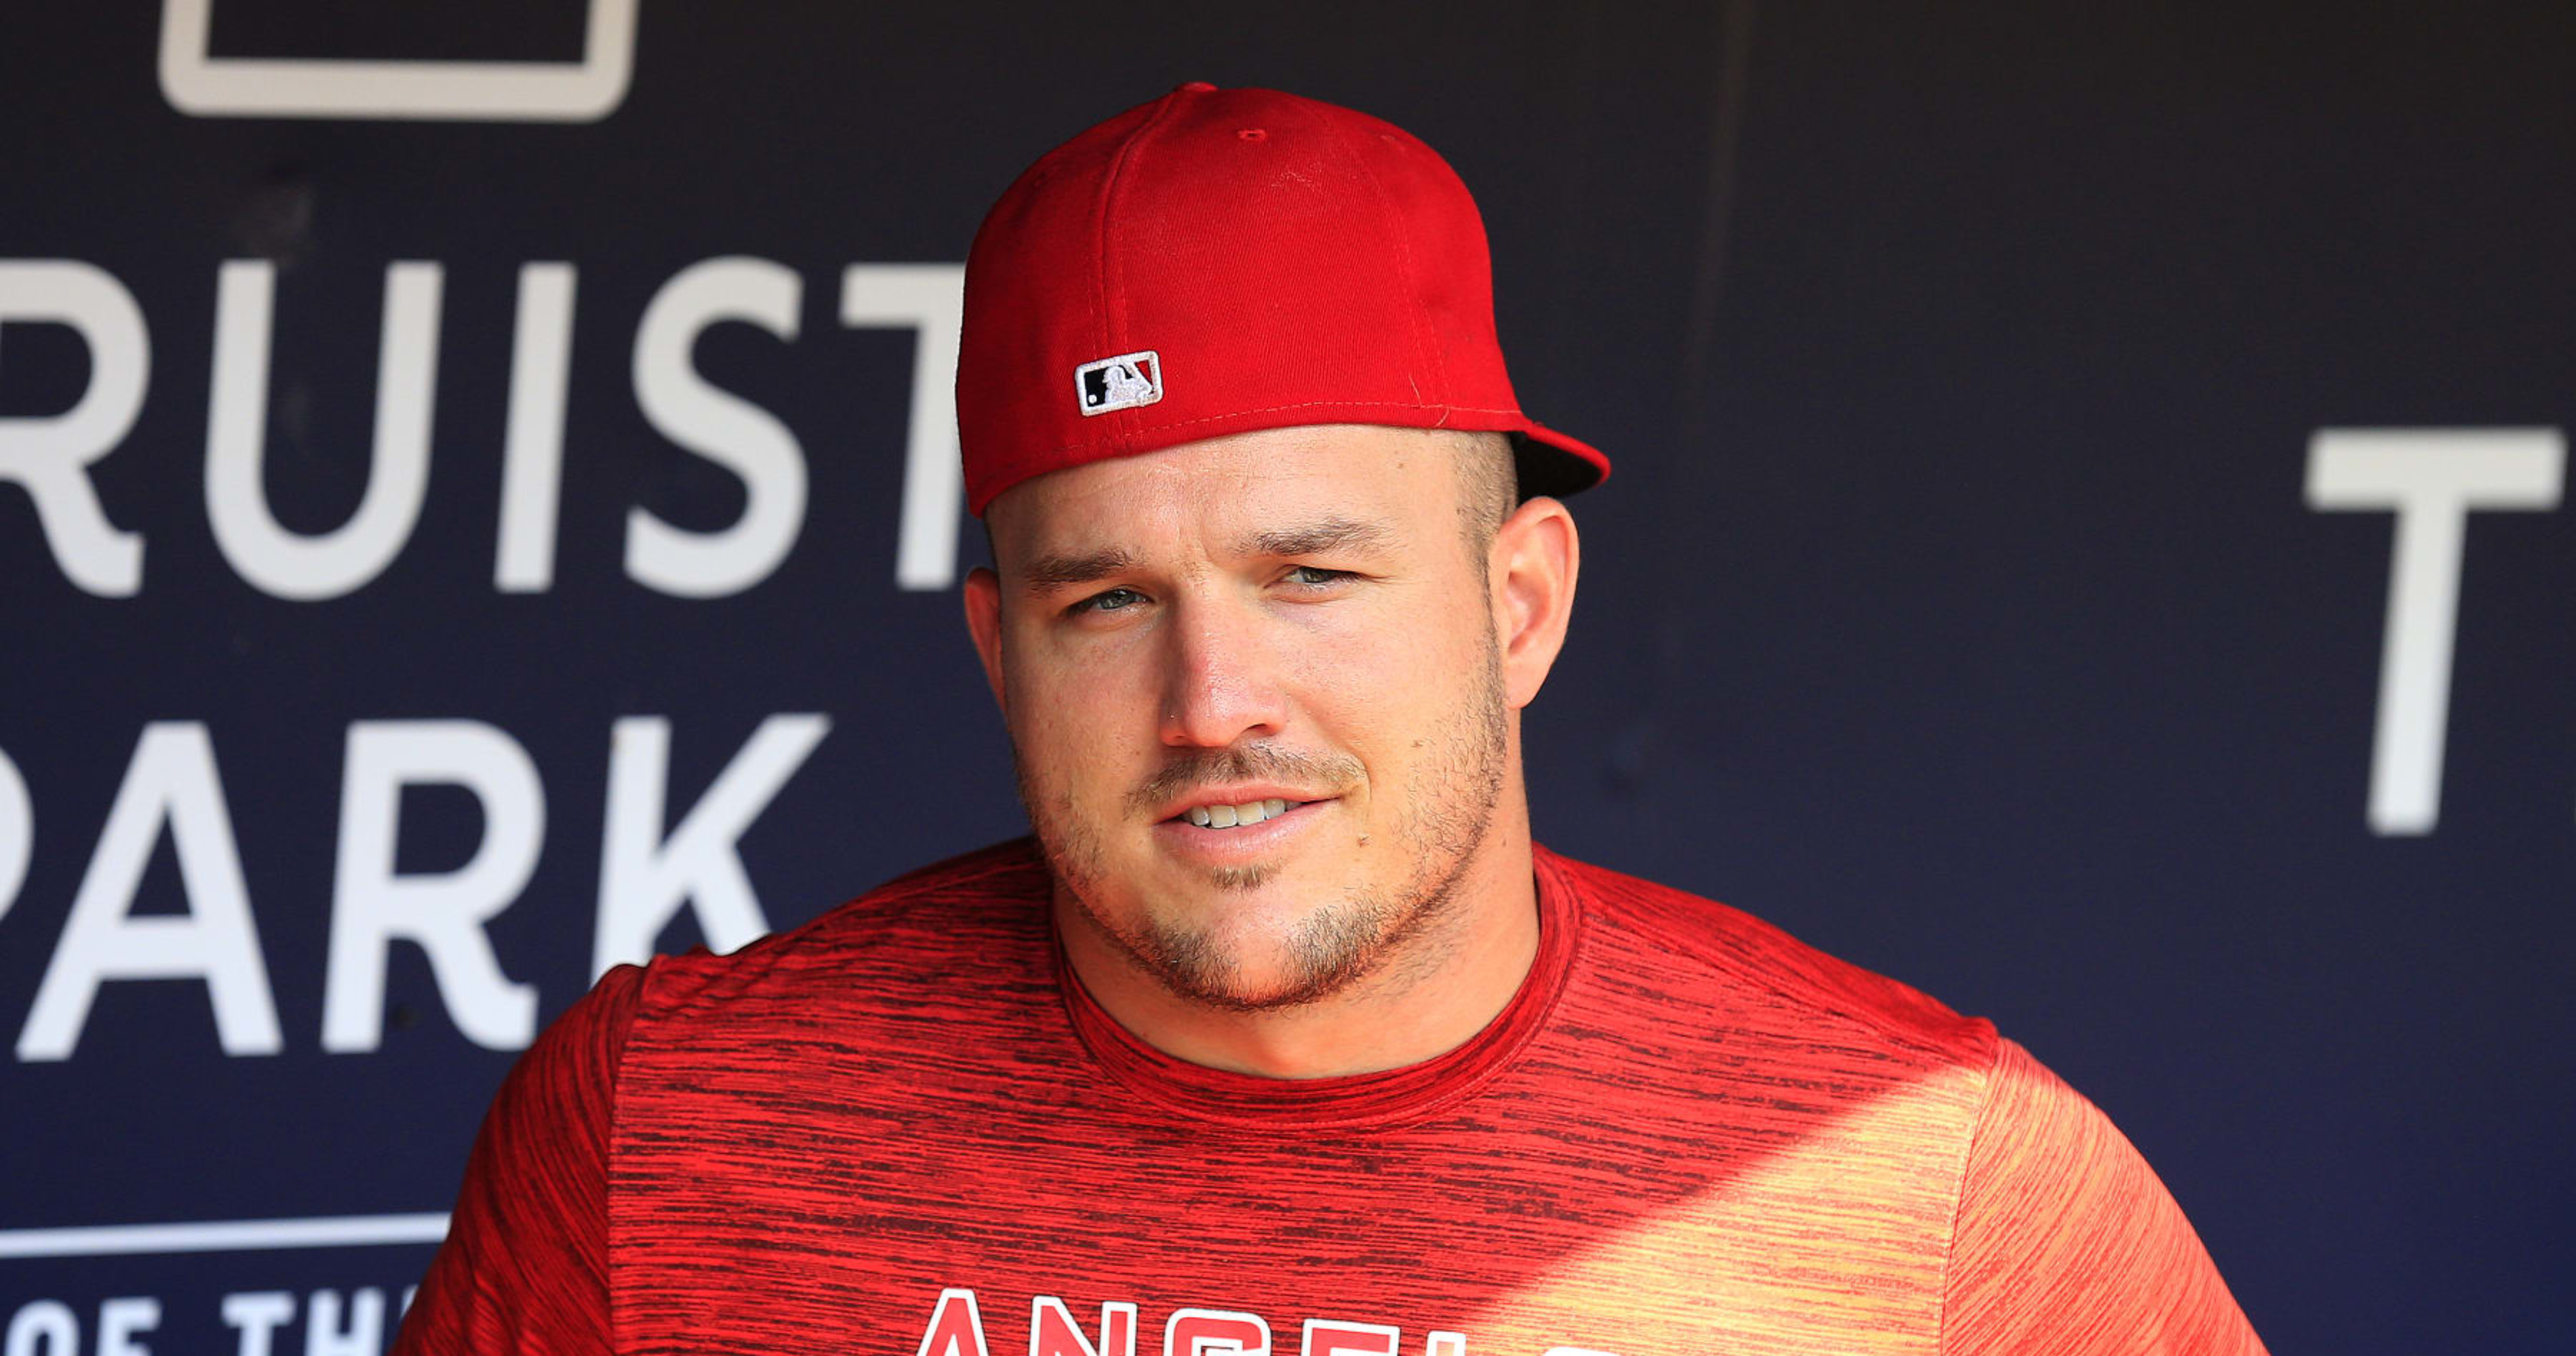 Mike Trout: 10-time MLB All Star diagnosed with rare back condition